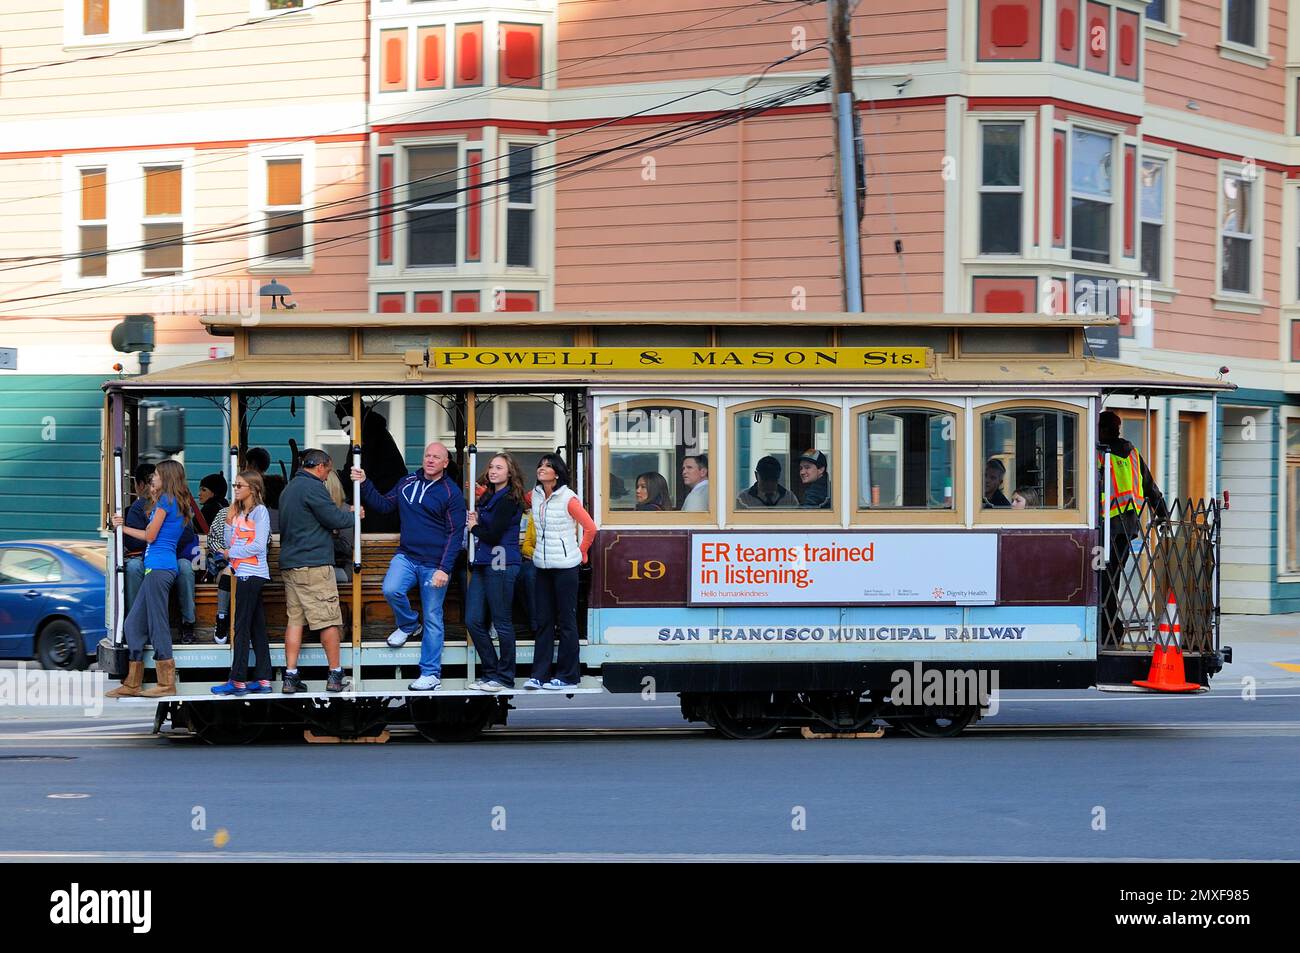 Cable car charm: City rides with passengers, vibrant architecture, and urban energy. Stock Photo